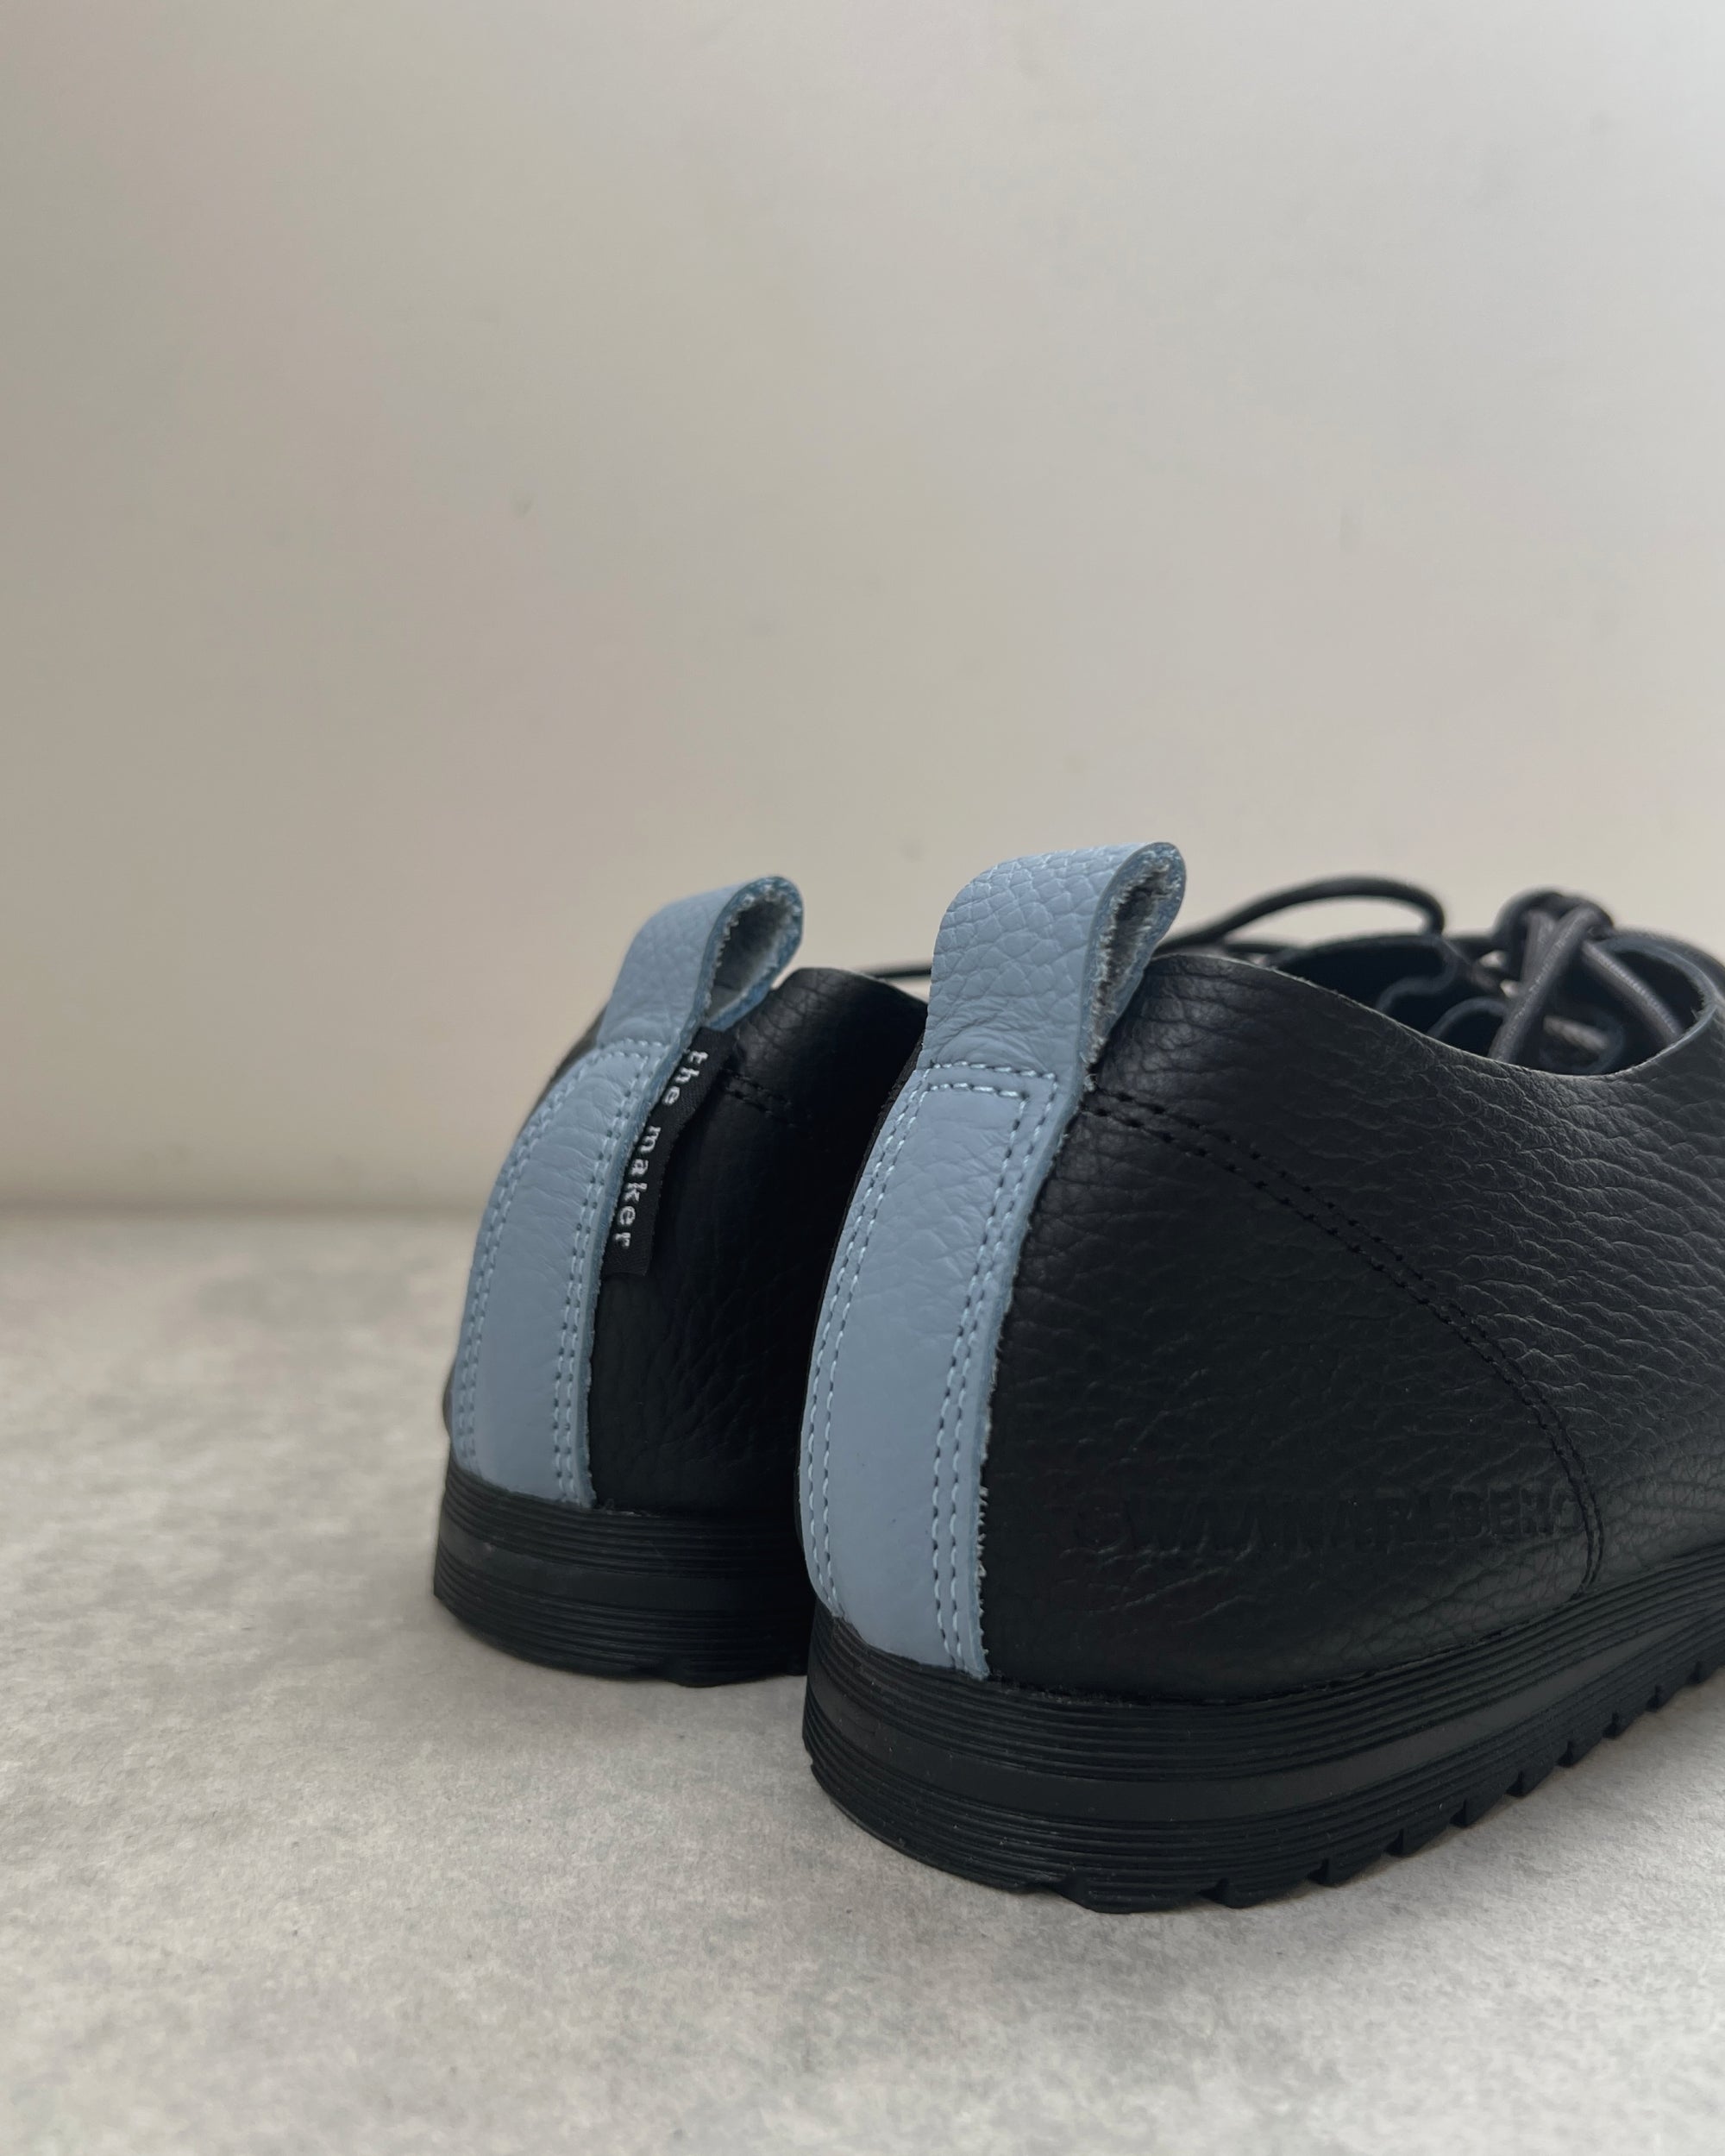 swaanarlberg : japanese leather shoes in carbon + wren